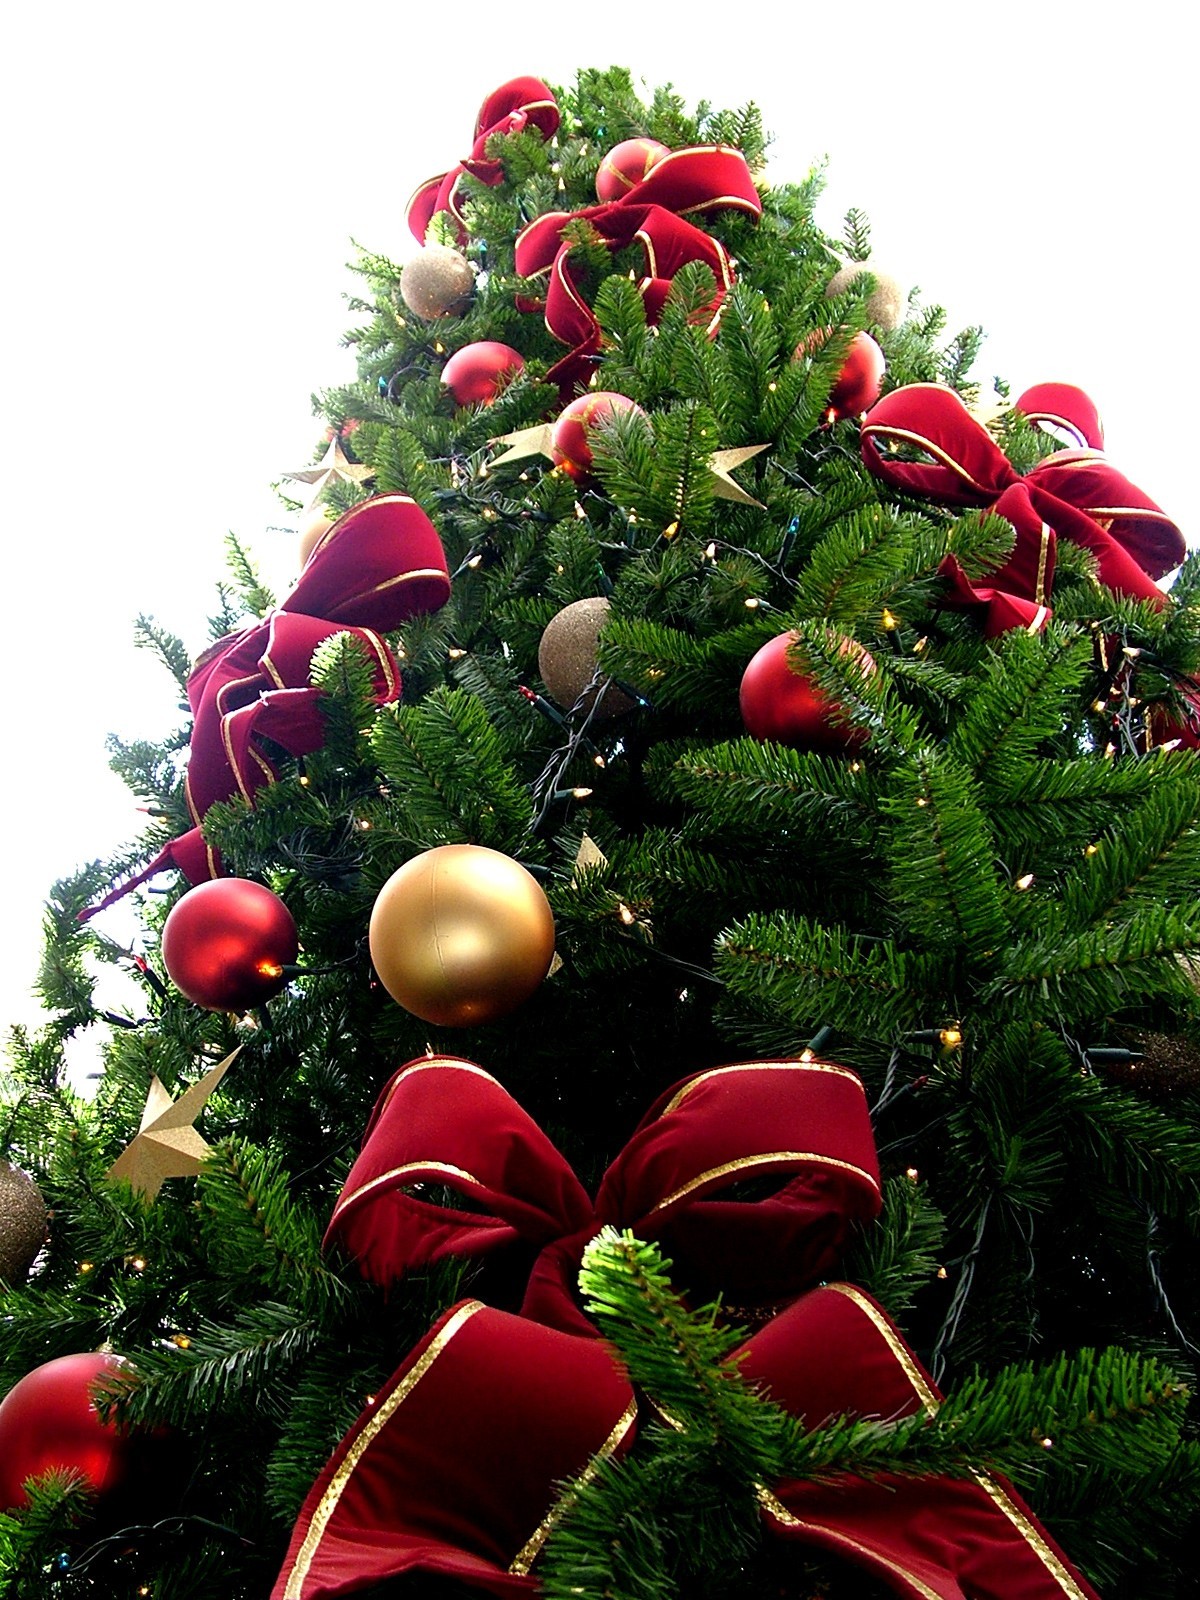 The Christmas Tree Is One Of The Most Widespread Christian